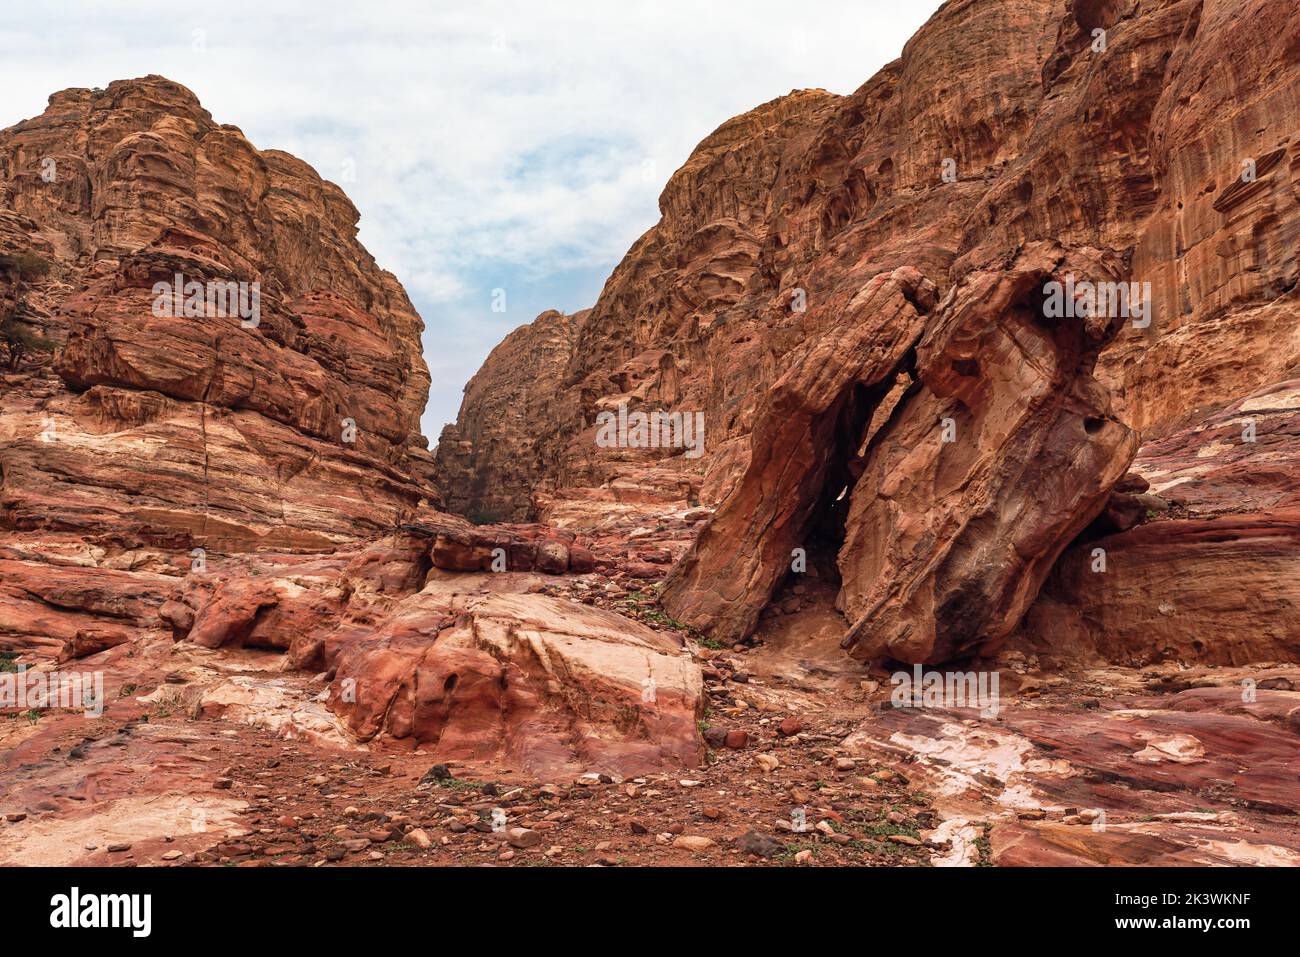 Typical landscape at Petra, Jordan, rocky walls around, few small green plants growing in red dusty ground Stock Photo